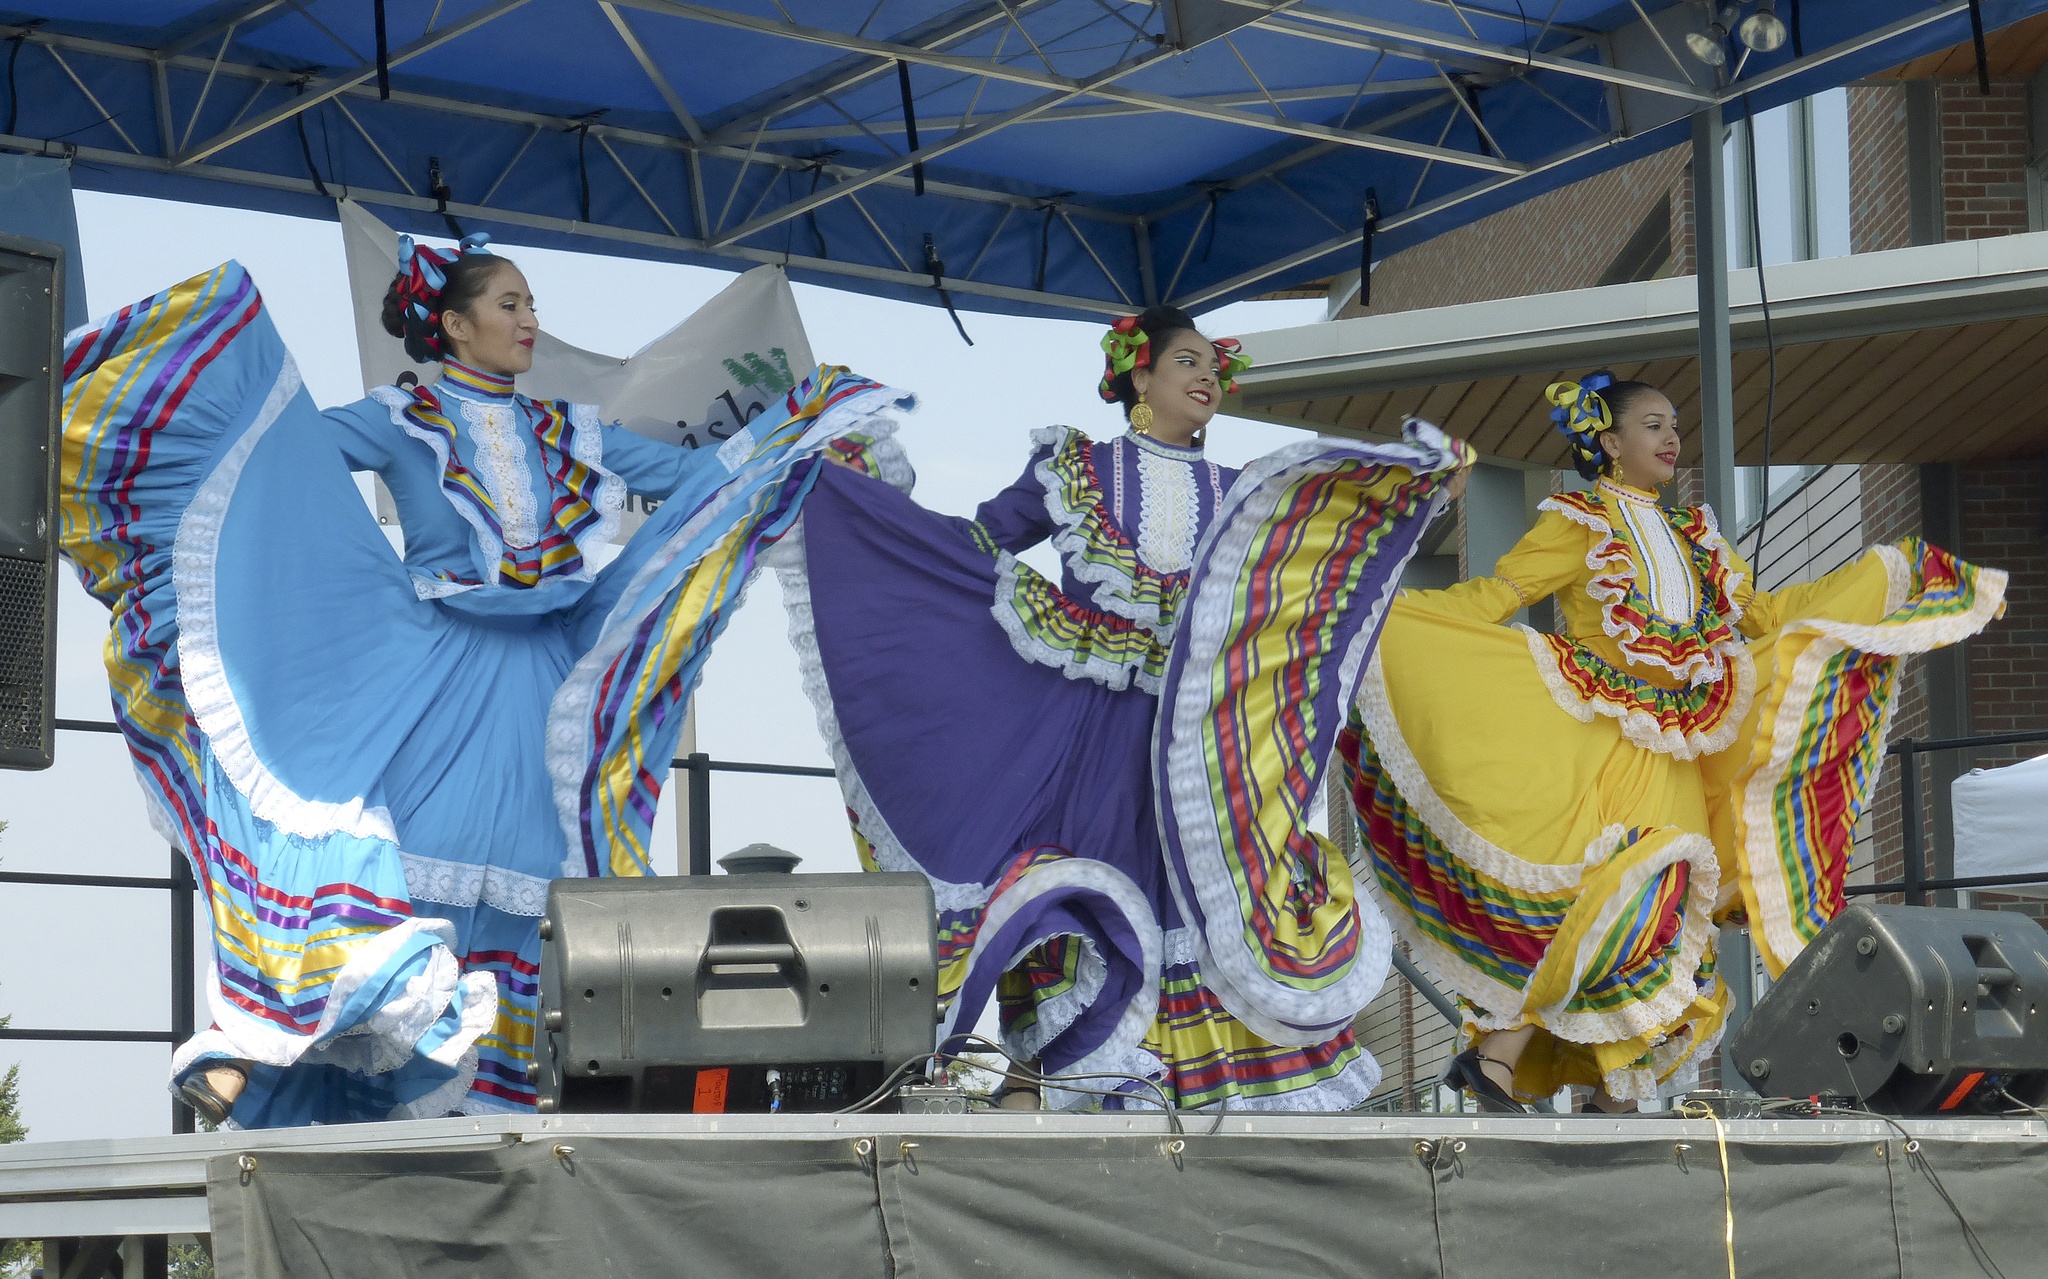 Sammamish residents can look forward to plenty of multicultural entertainment at this year’s Sammamish Days festival (photo courtesy of the city of Sammamish).